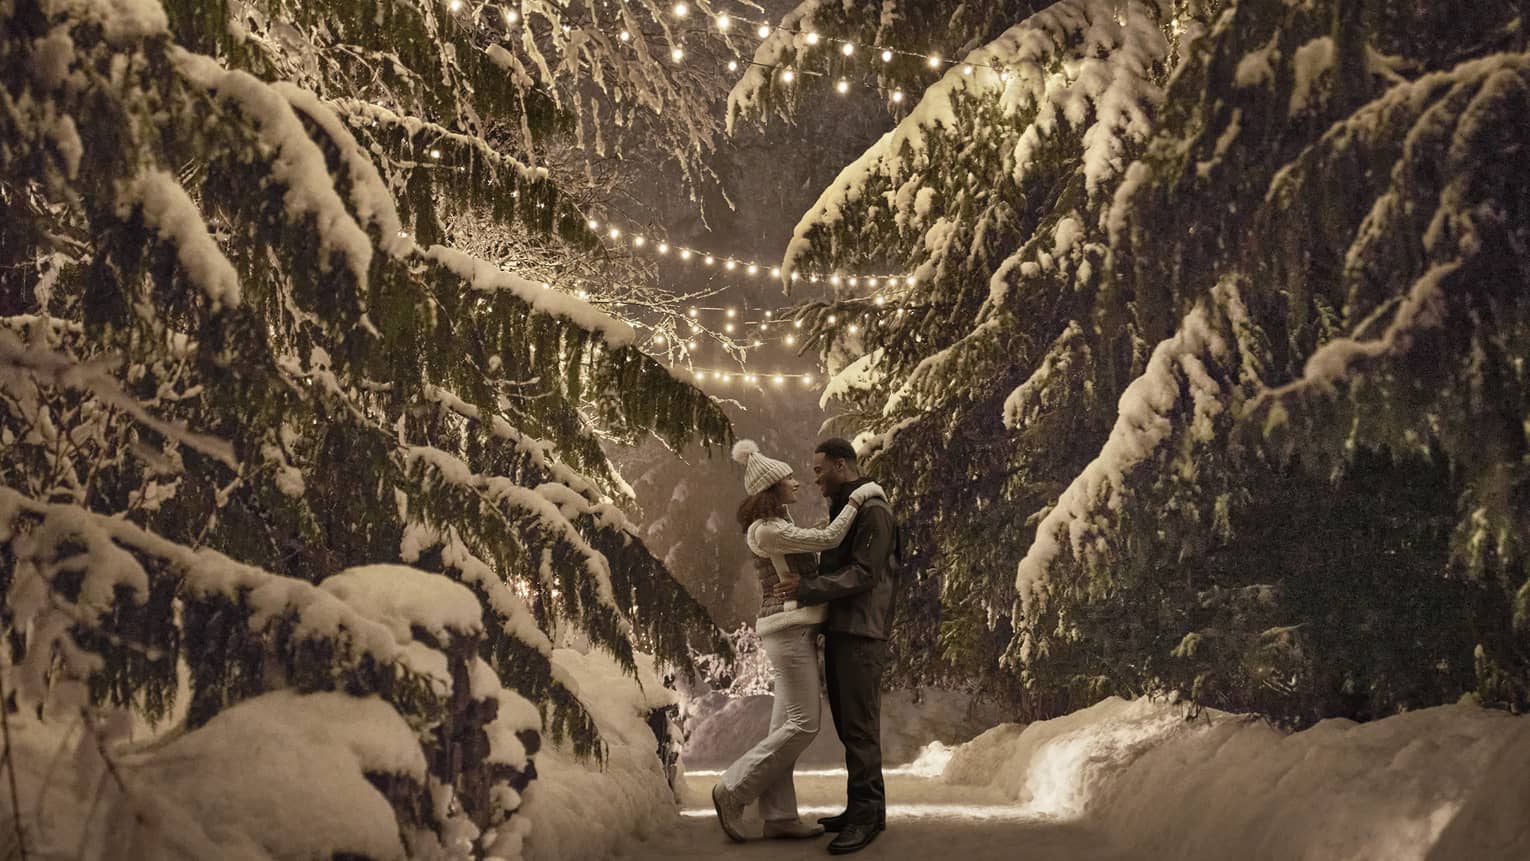 Couple wearing winter coats embrace on snow covered path between large trees at night